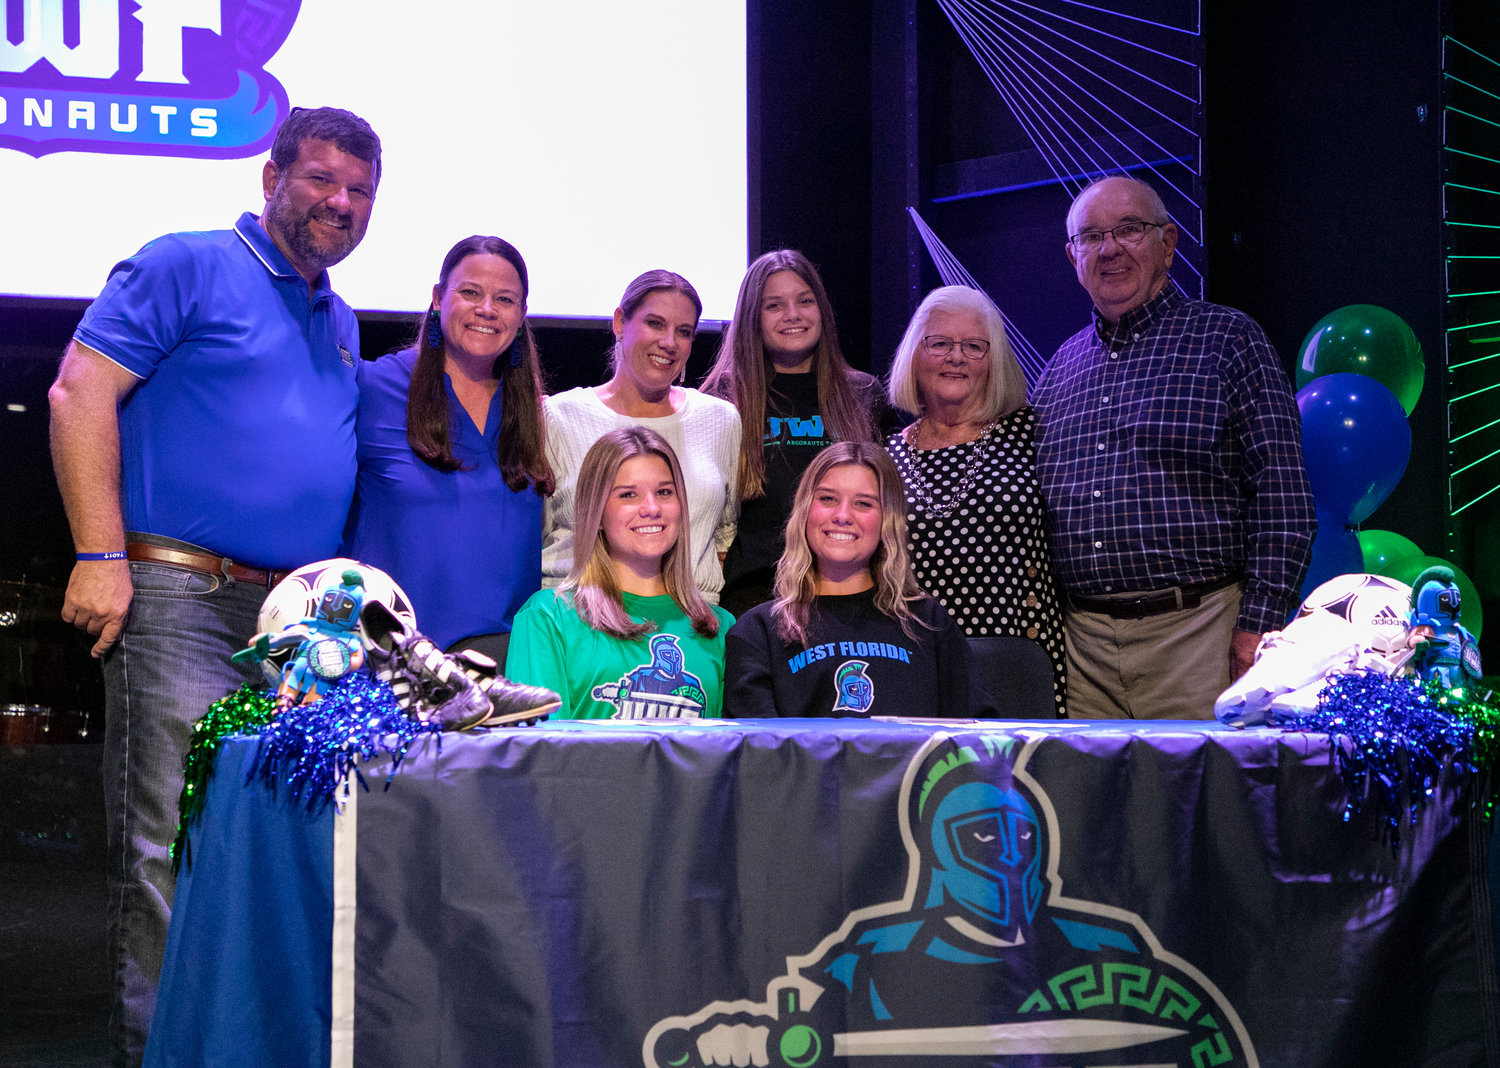 Fairhope seniors Addison and Emily Smith were joined by family in signing with the West Florida Argonauts Thursday night, Nov. 10, at 3Circle Church. The National Signing Day event cemented the twins’ verbal commitment made in August.